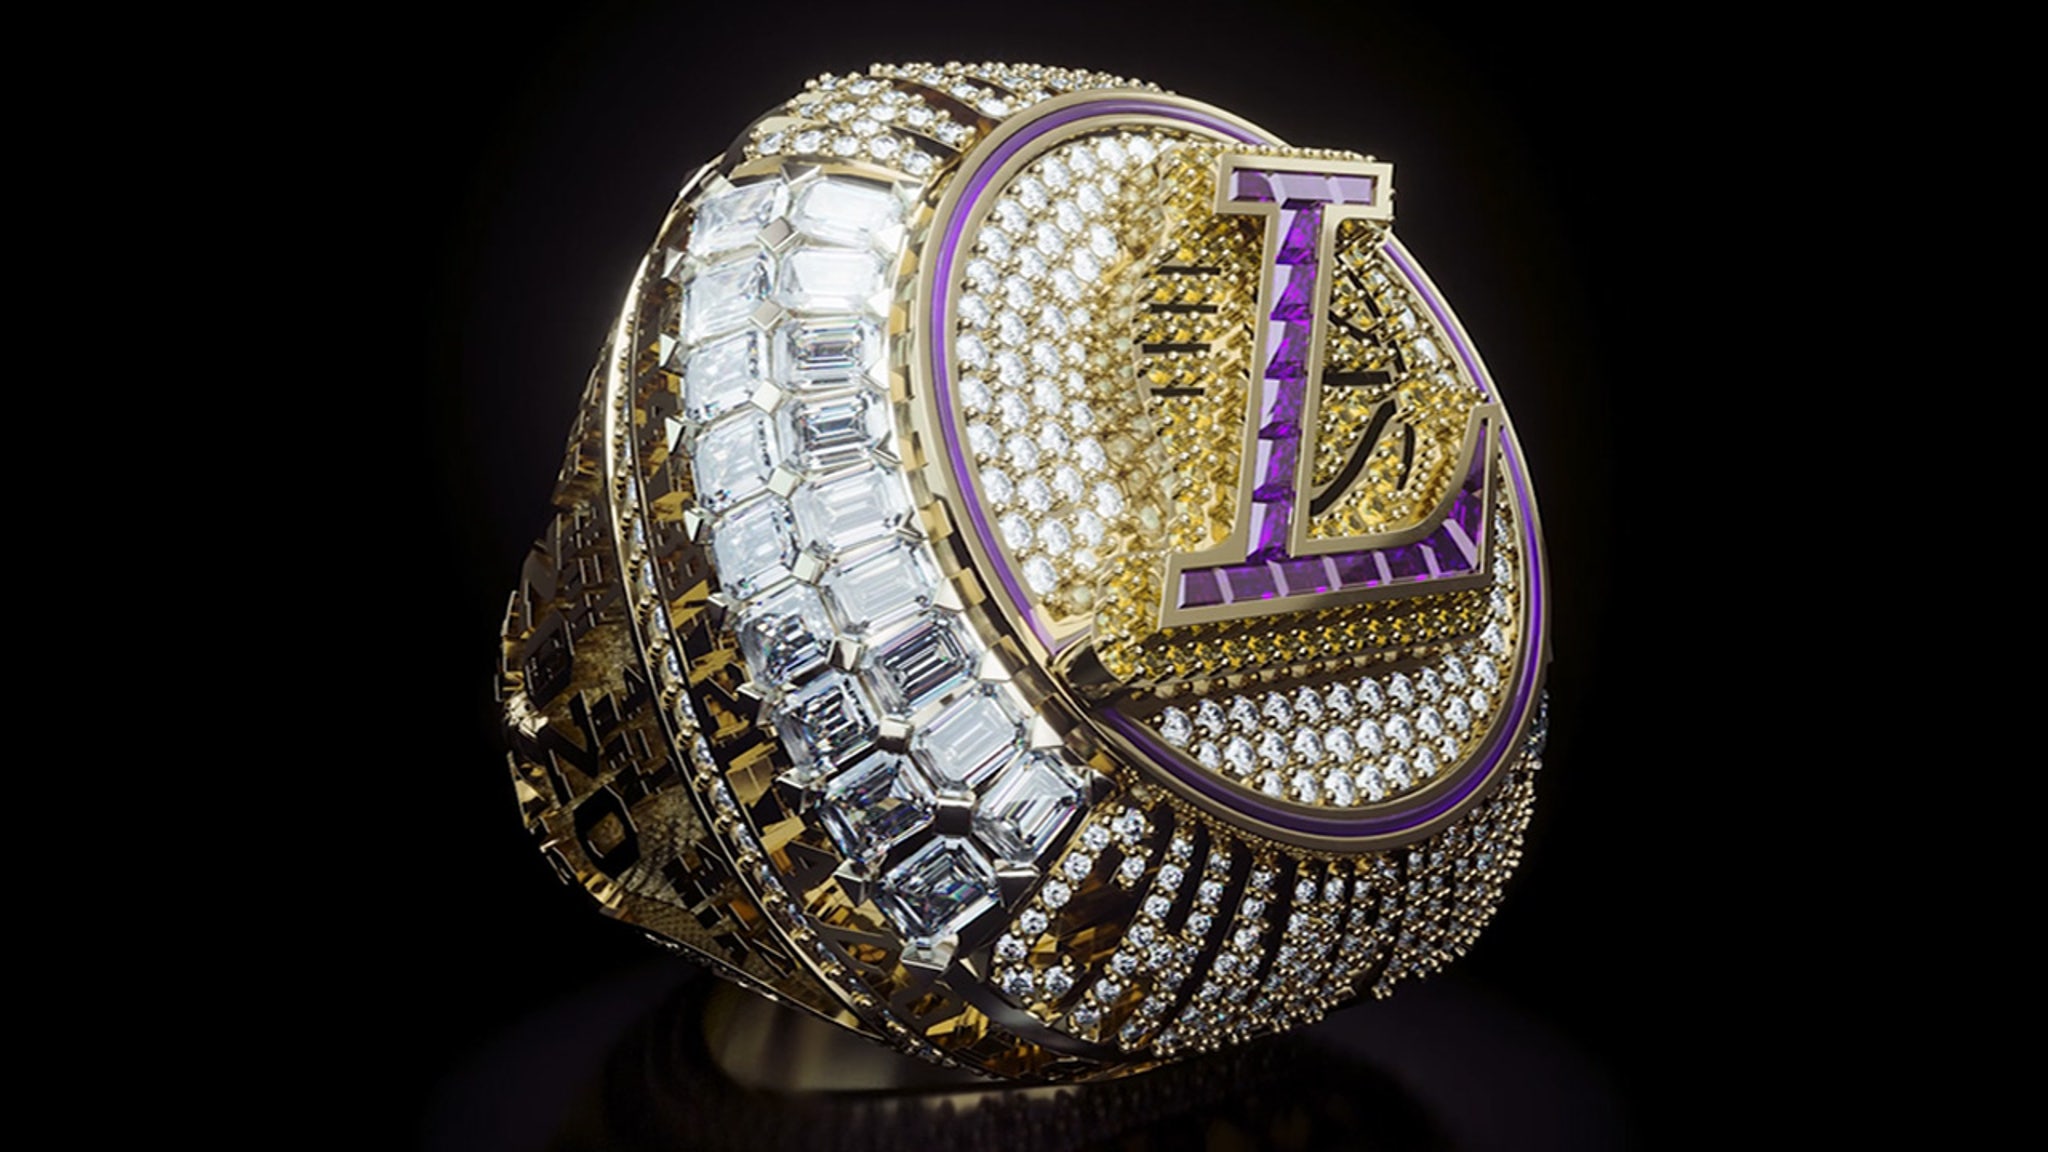 Everyone on Lakers deserves a championship ring, petitions be